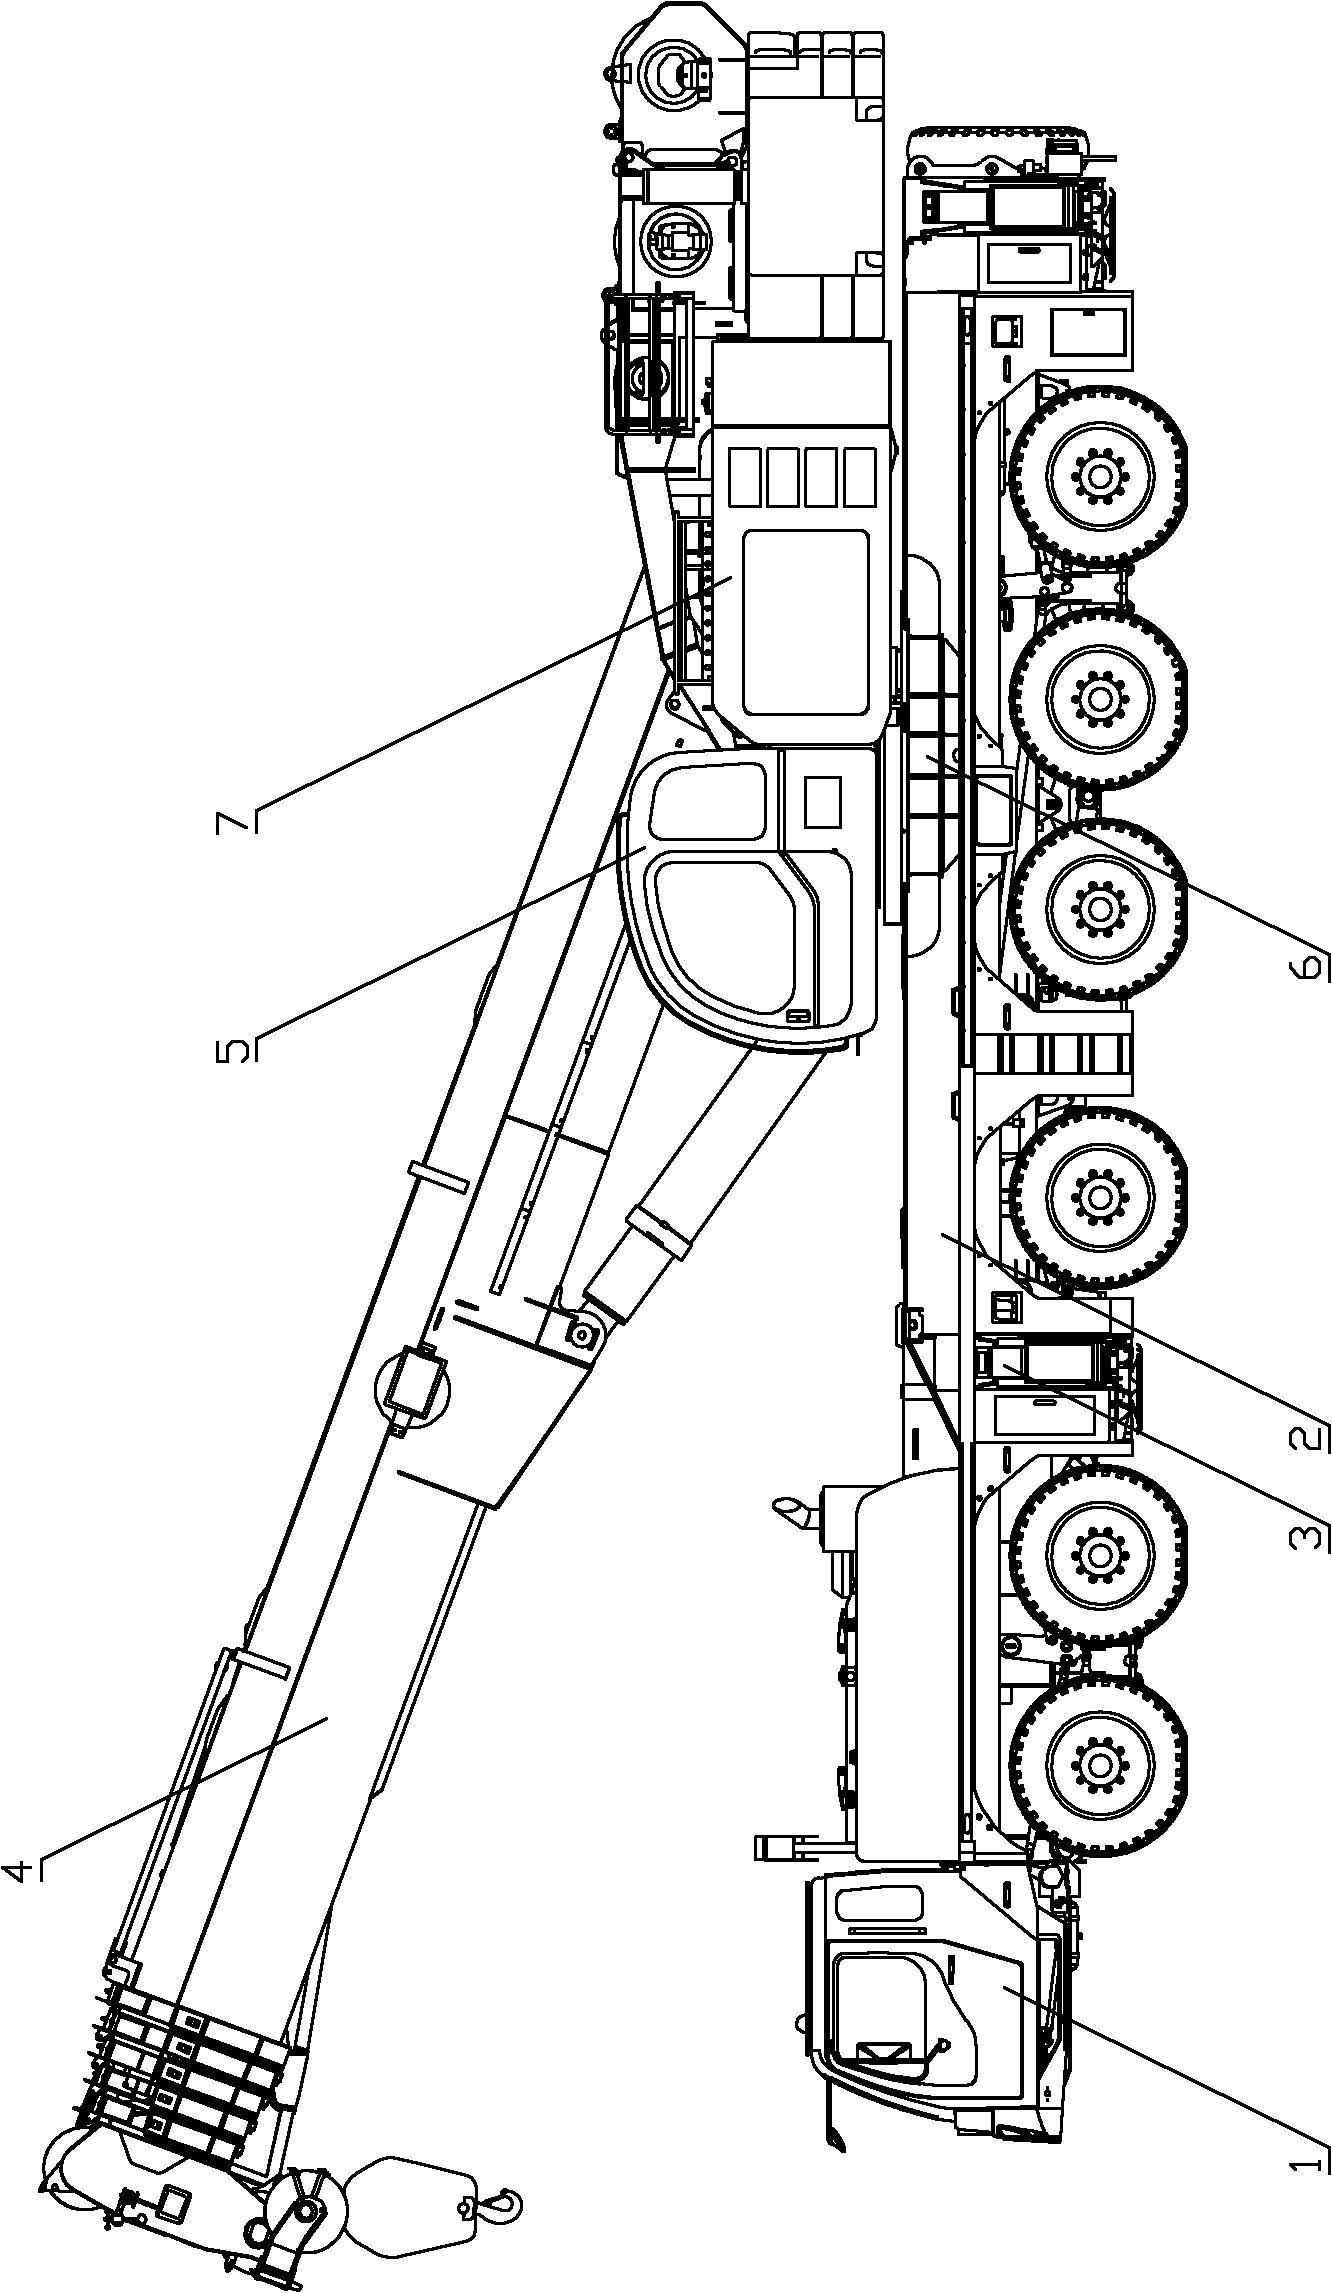 Mobile crane and support leg pressure detecting and controlling device thereof